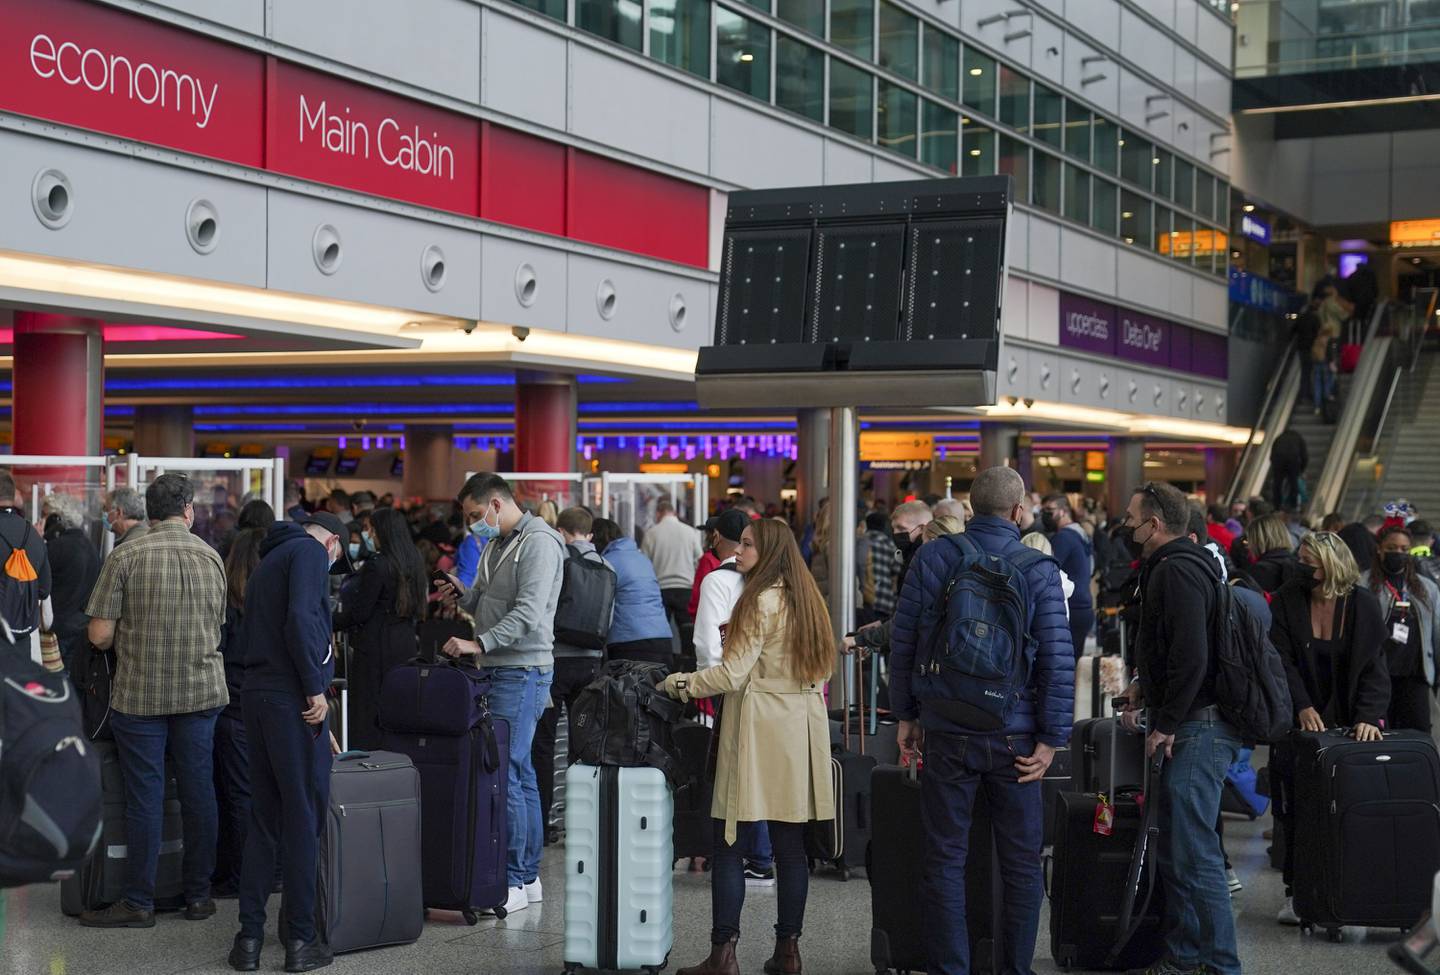 Passengers at Heathrow Airport in London. Airport fees are charged to airlines but are generally passed down to passengers in fare prices. PA
